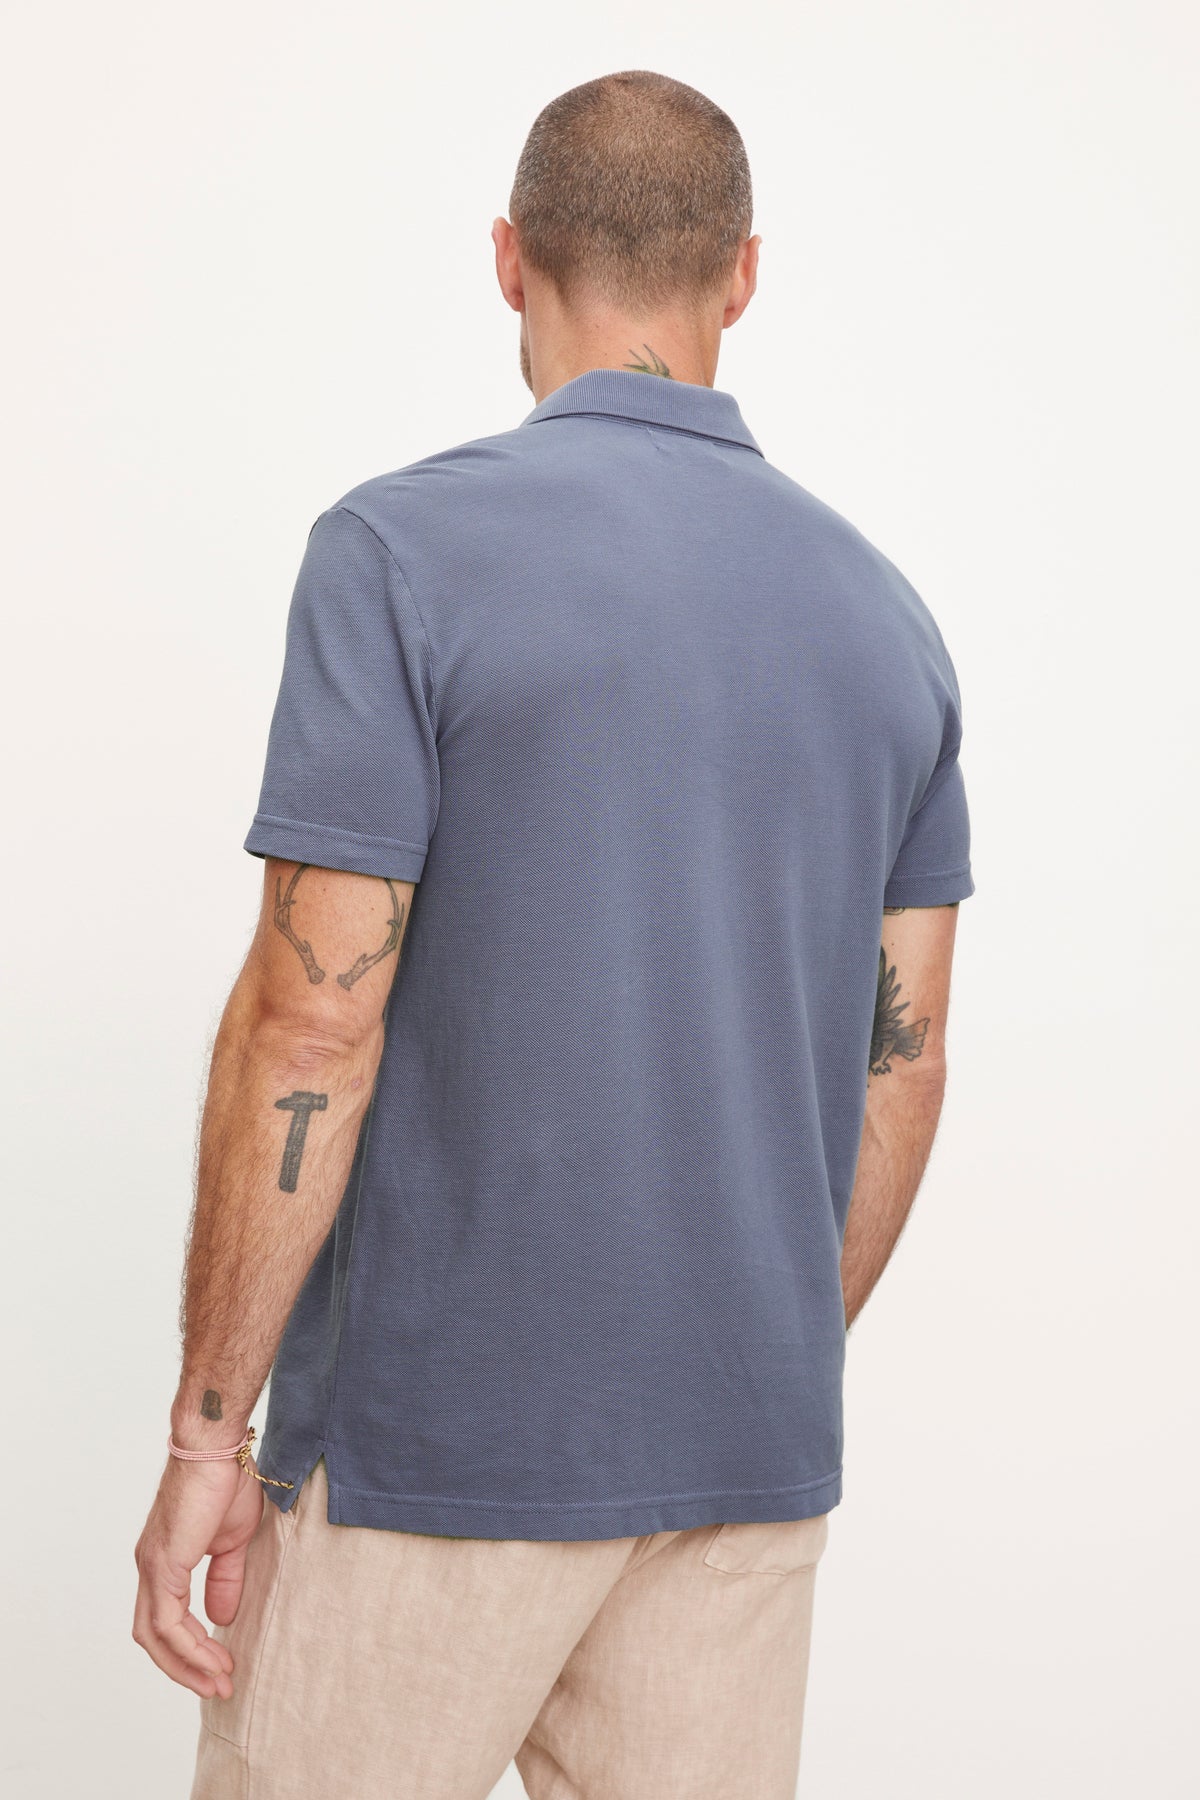 The back view of a man wearing a Velvet by Graham & Spencer Willis Pique Polo shirt.-36009040773313